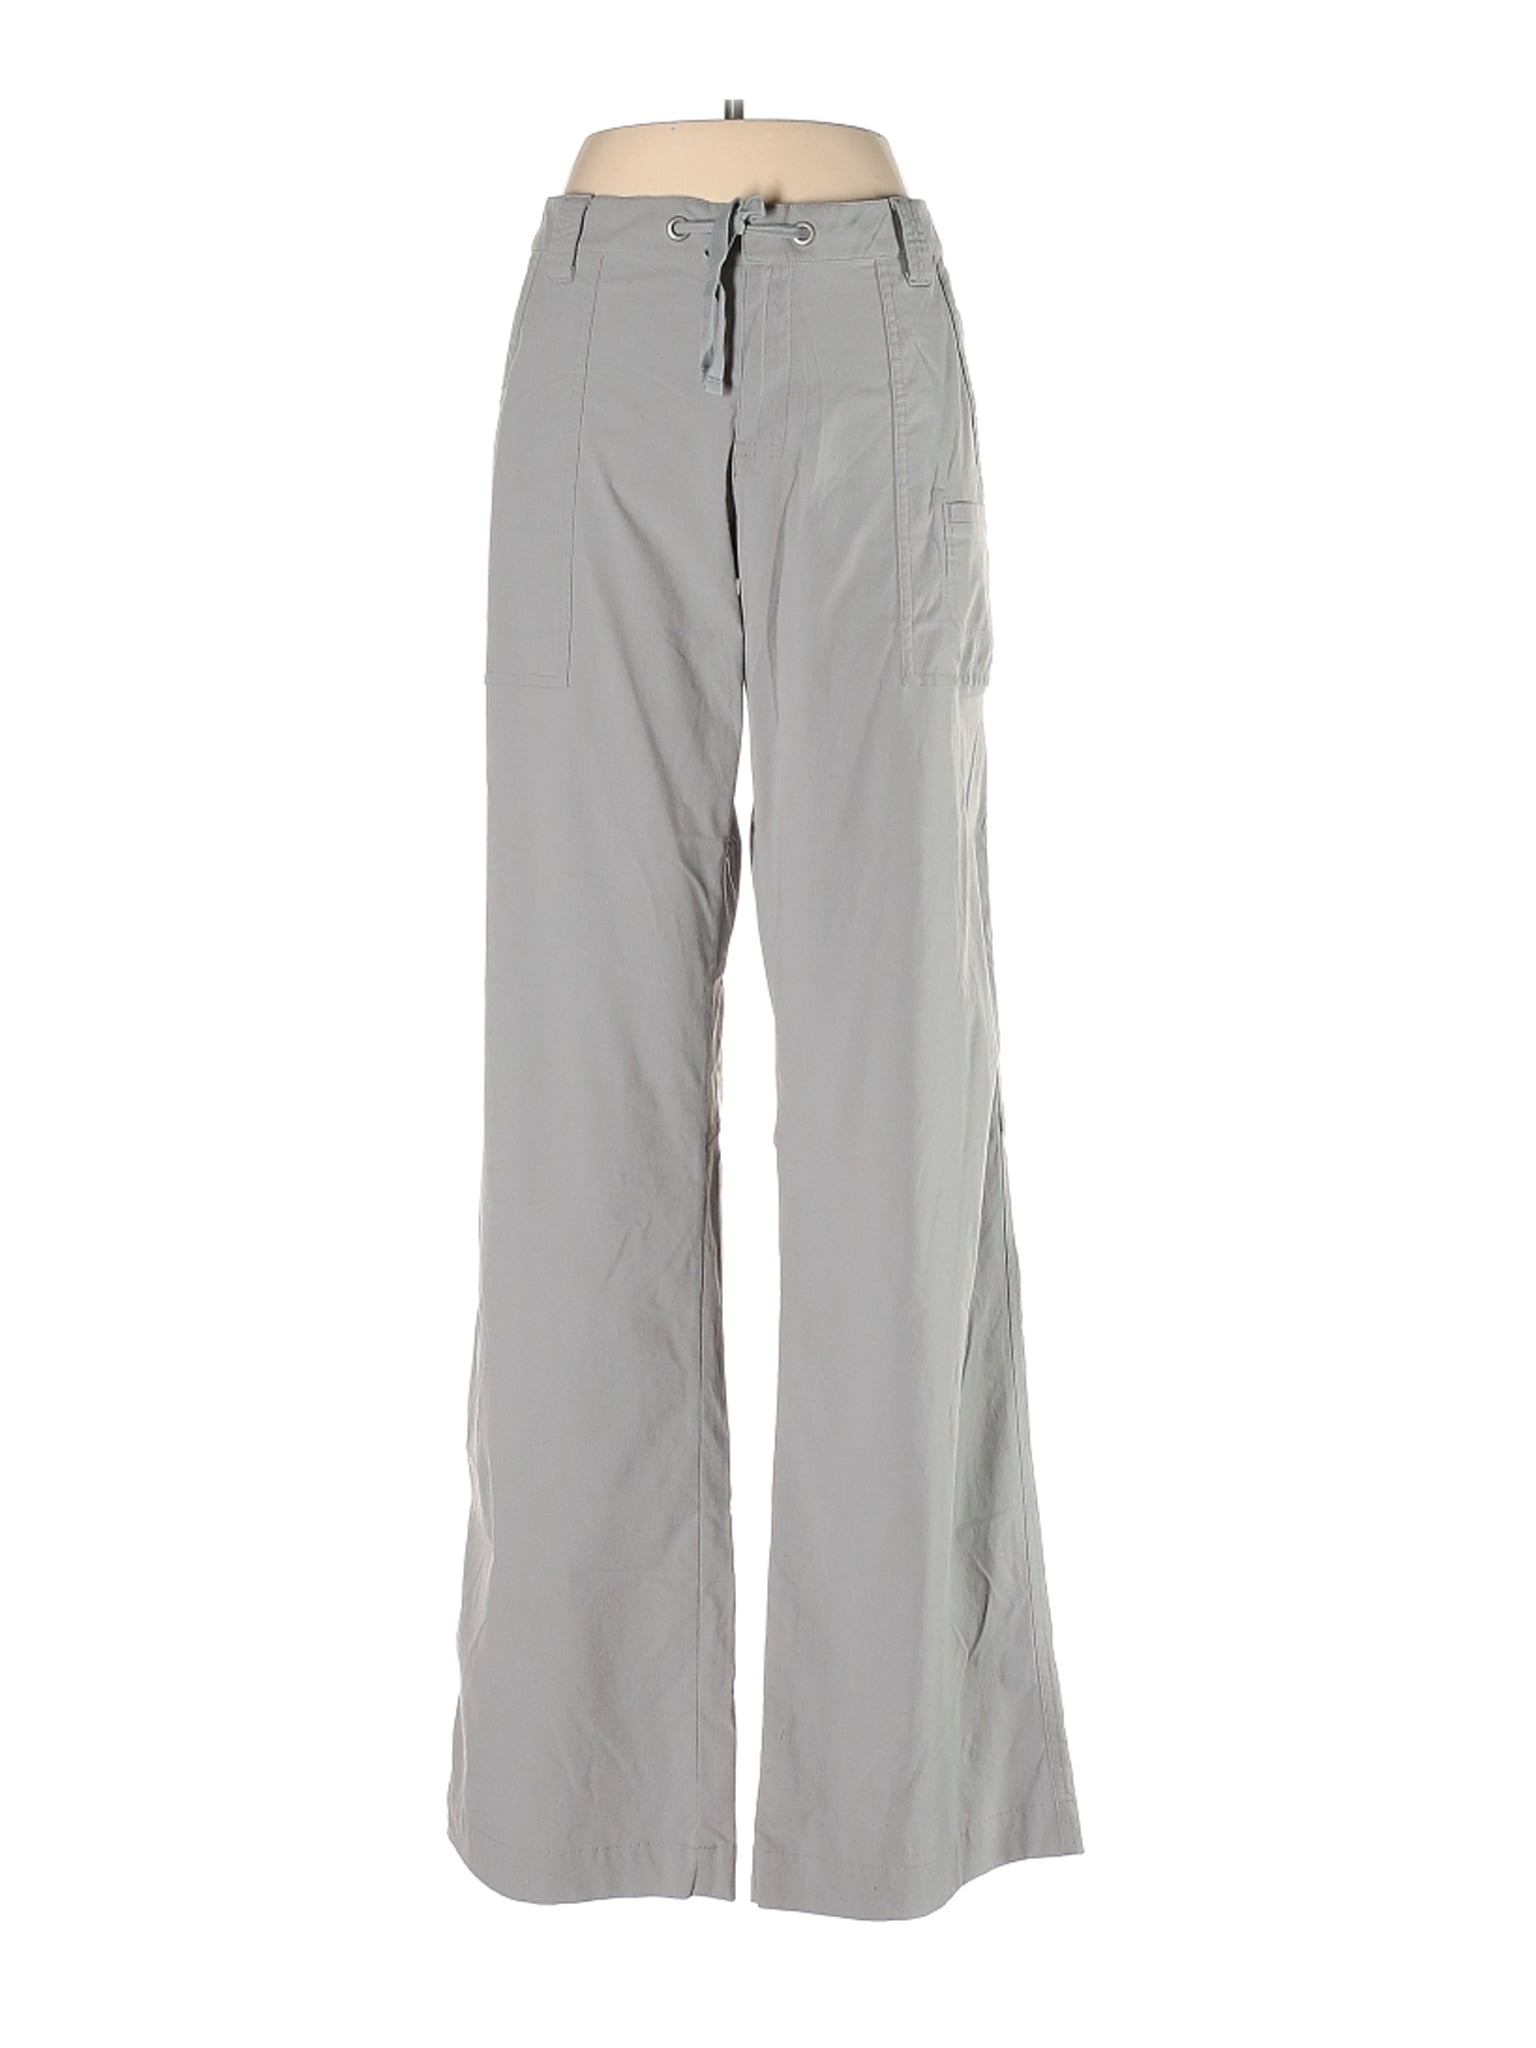 womens tall casual pants